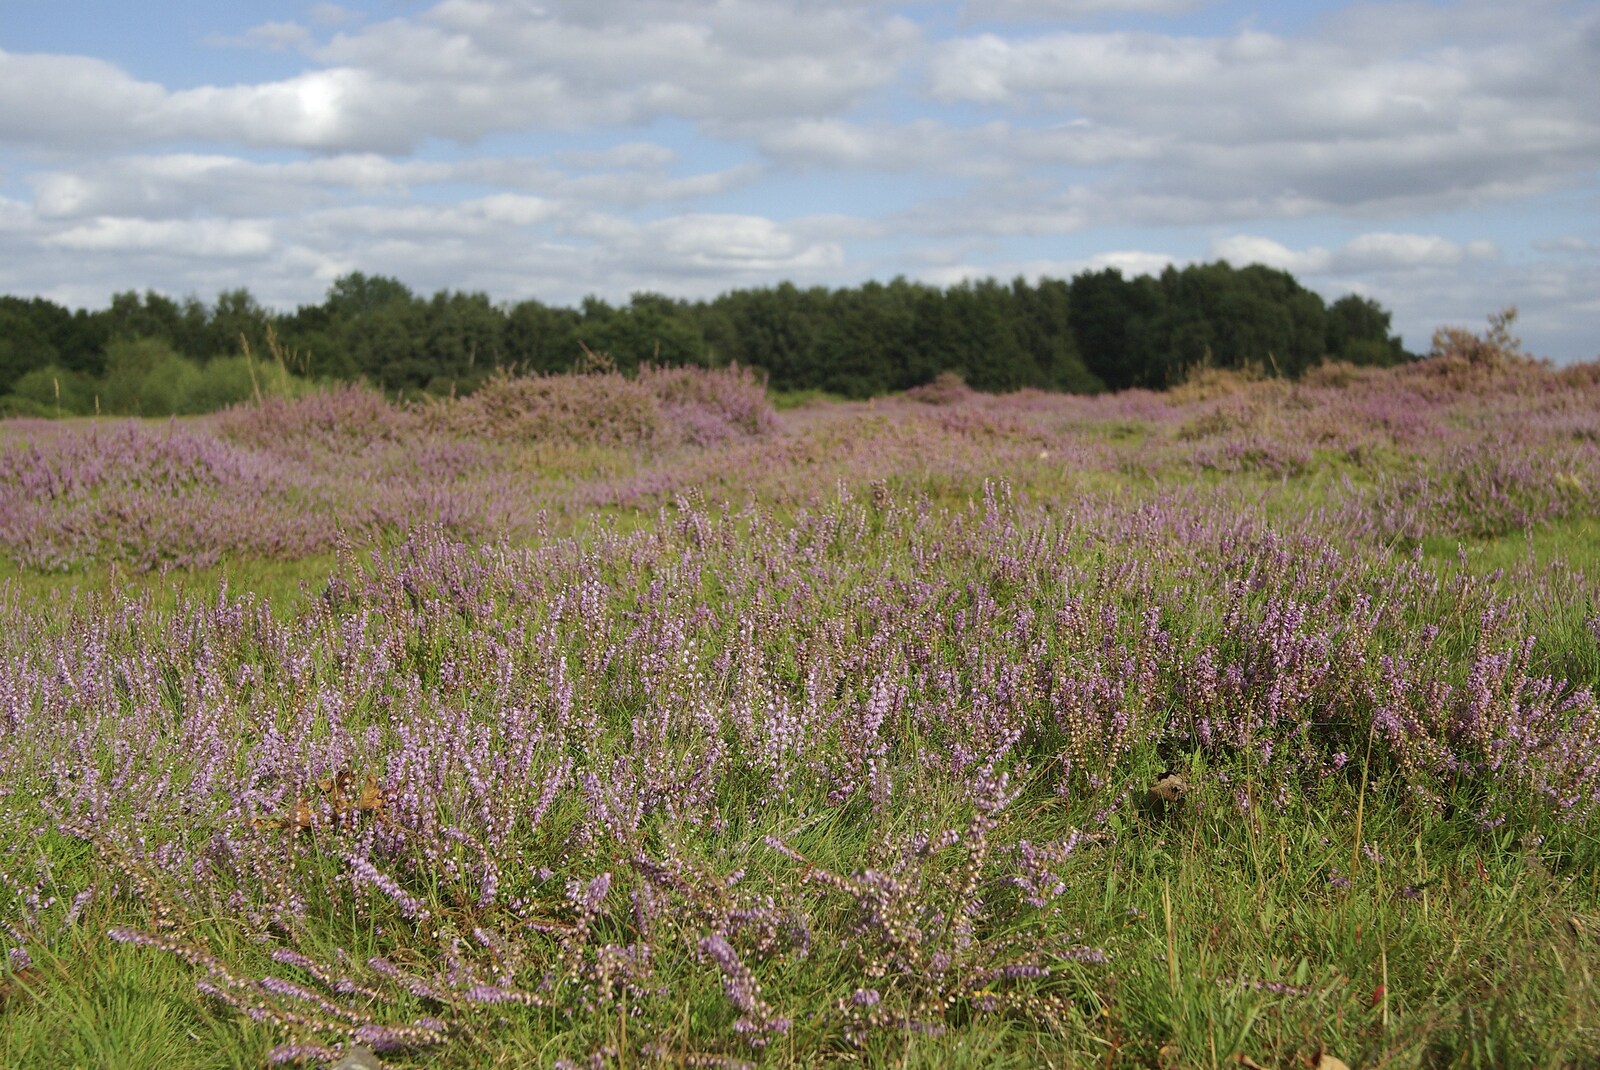 A Picnic on The Ling, Wortham, Suffolk - 26th August 2007: More purple heather